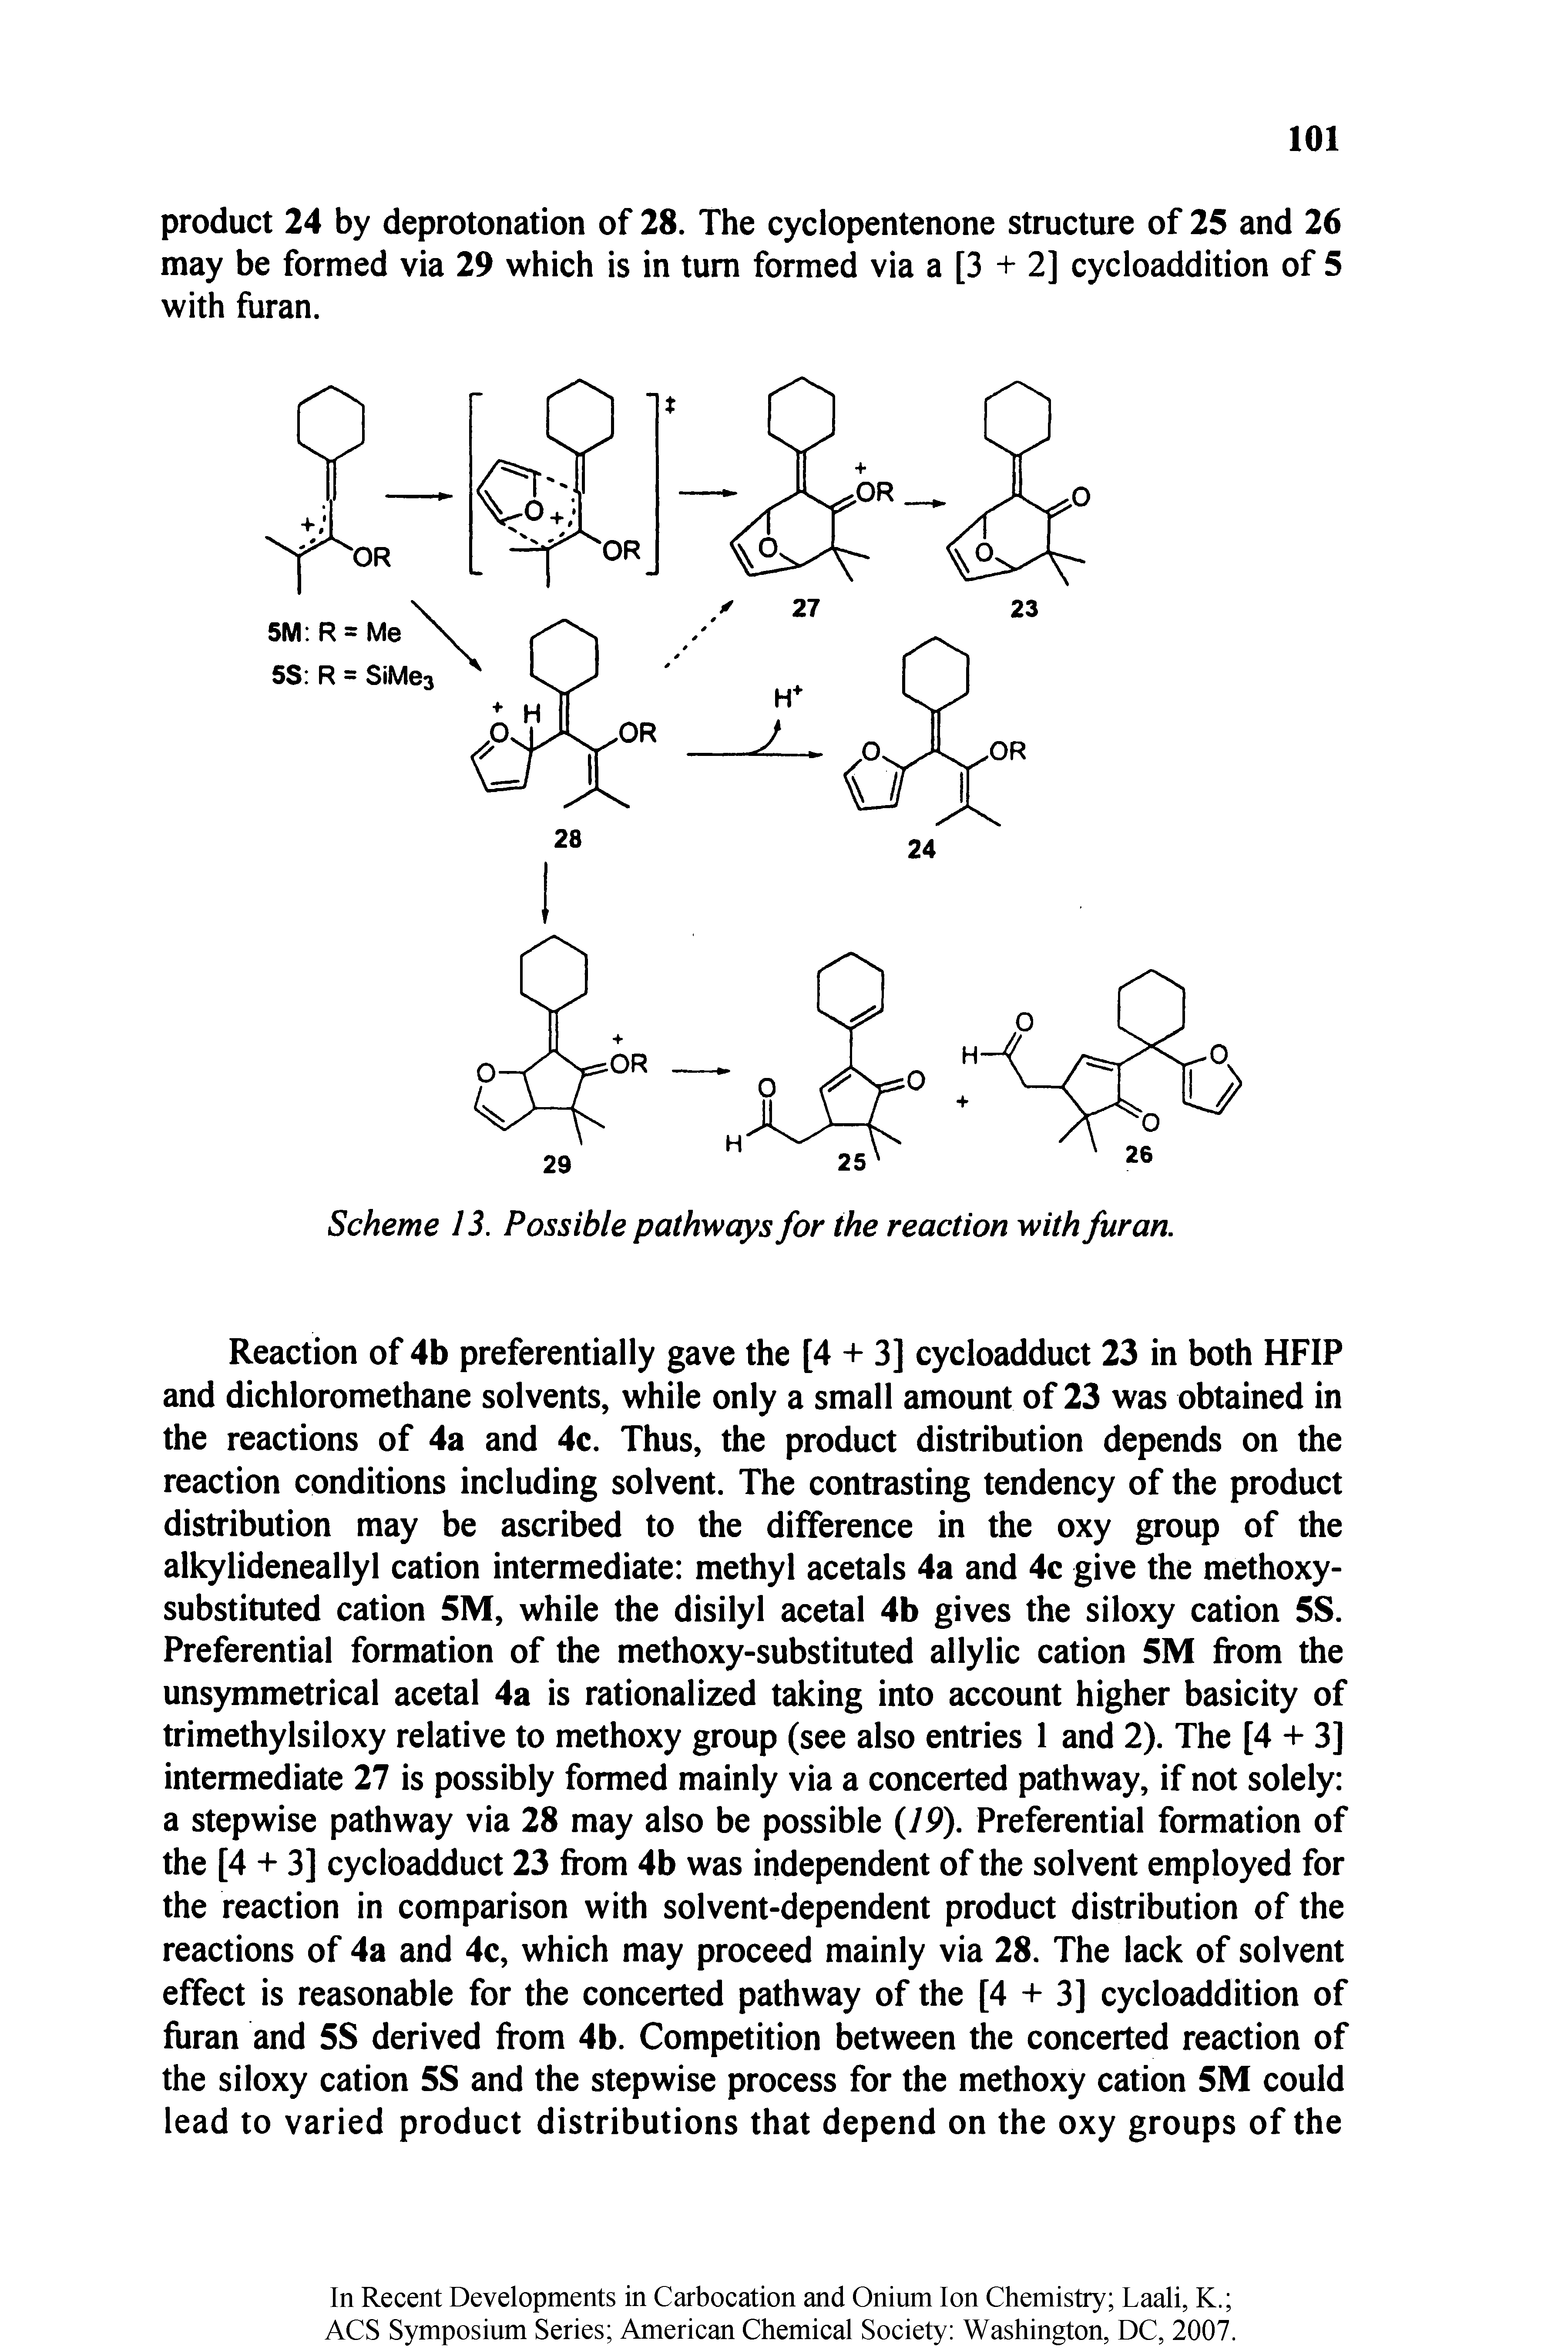 Scheme 13. Possible pathways for the reaction with furan.